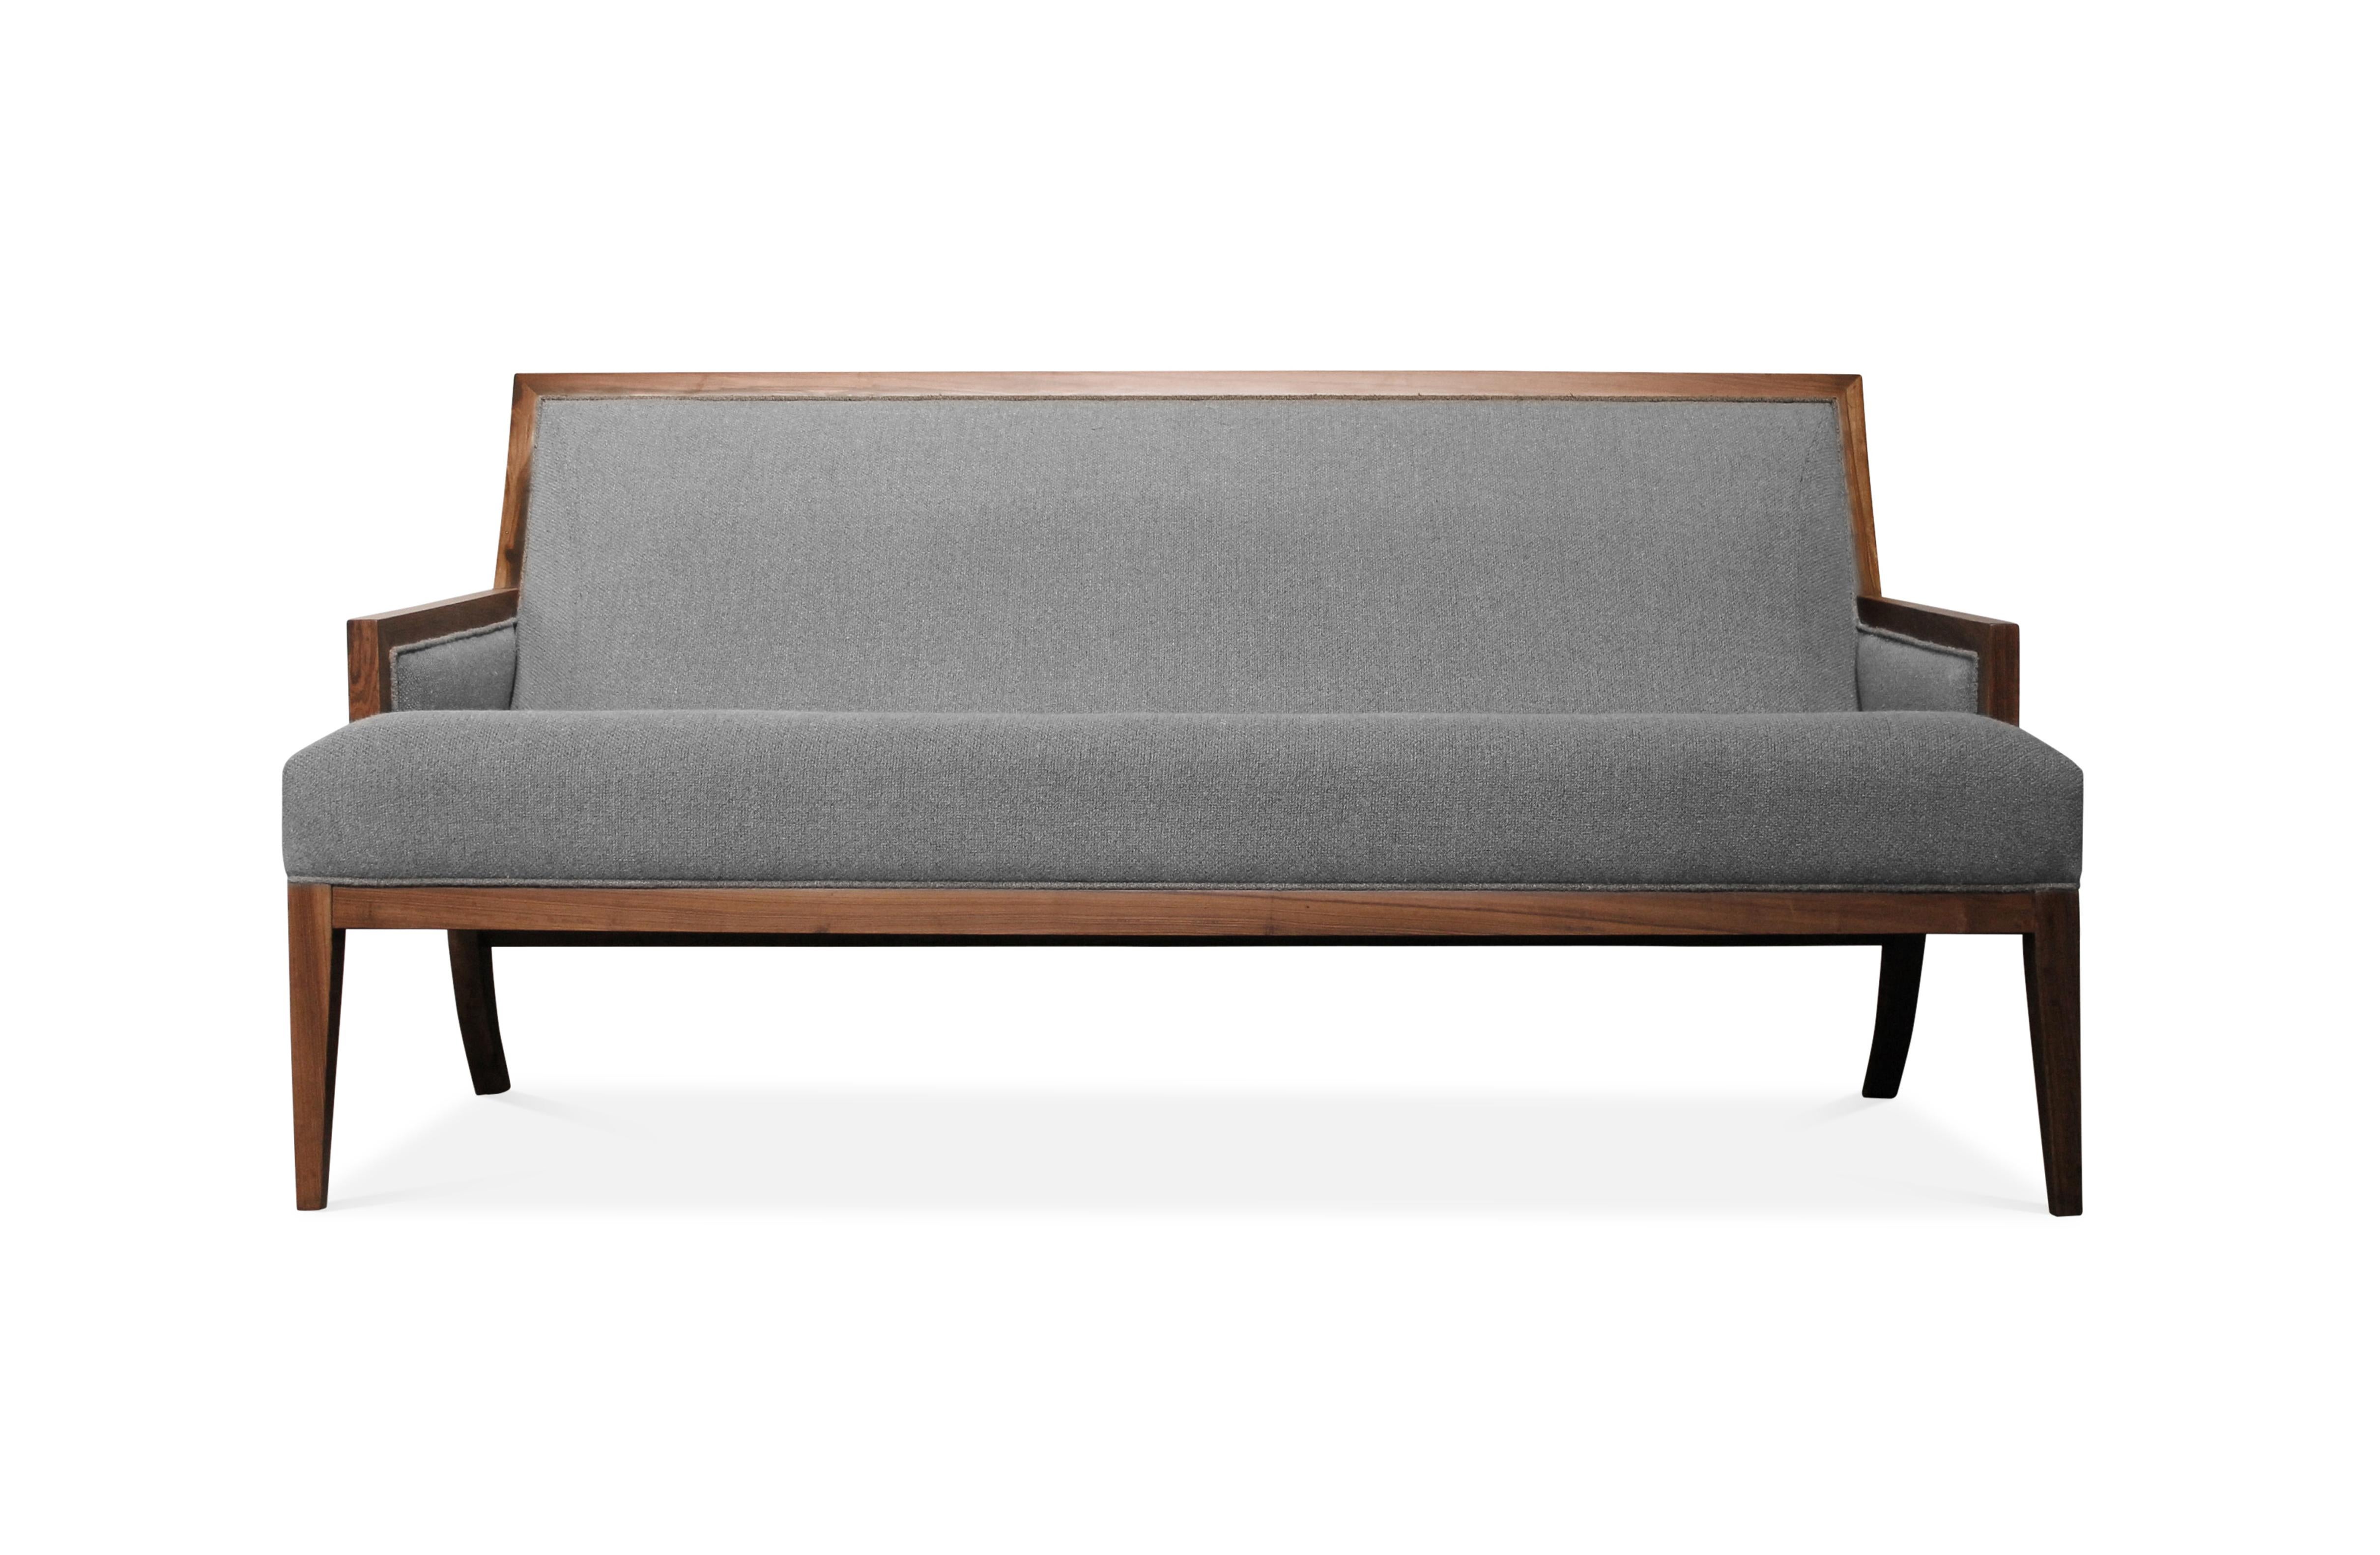 The Belgrano Settee is inspired by mid-twentieth century modernist design and features an ergonomic backrest. It can be customized into any size. Shown in Argentine Rosewood and Coraggio fabric (C.O.M.) but available in any finish or upholstery